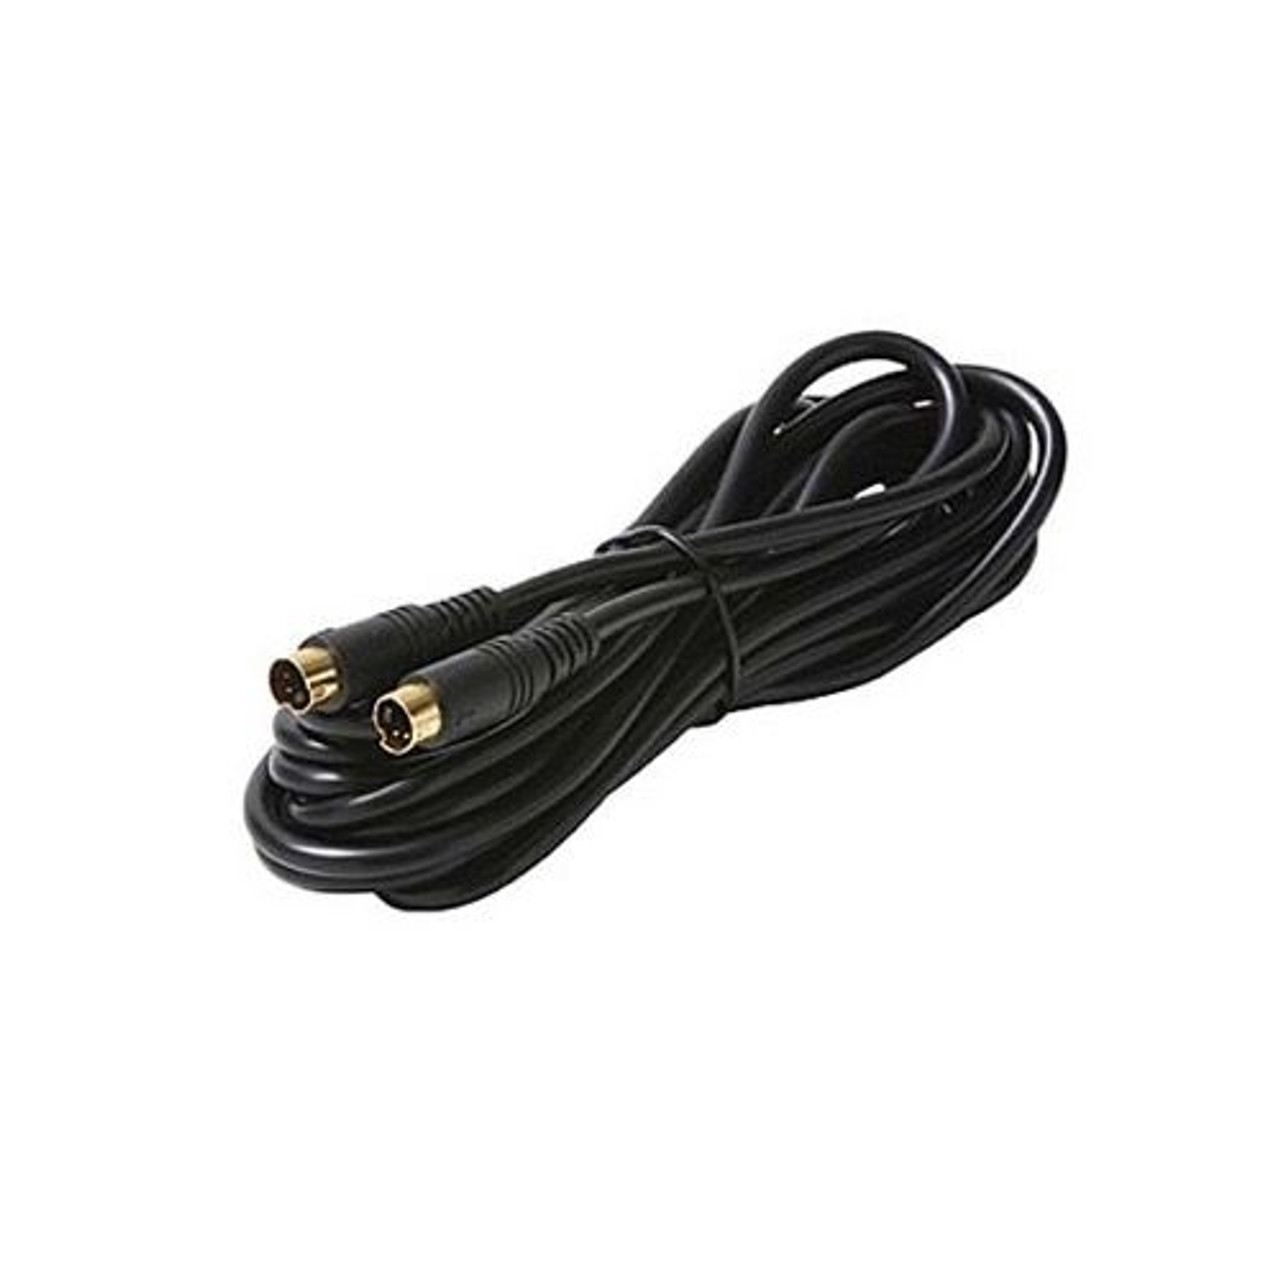 Eagle 50' FT S-Video VHS Gold Plate Cable 4 Pin Mini Din Male to Male Cable with Gold Plated Din Each End Shielded Digital Video Cable TV Connection Cord Premium Output Input Hook-Up Jacks